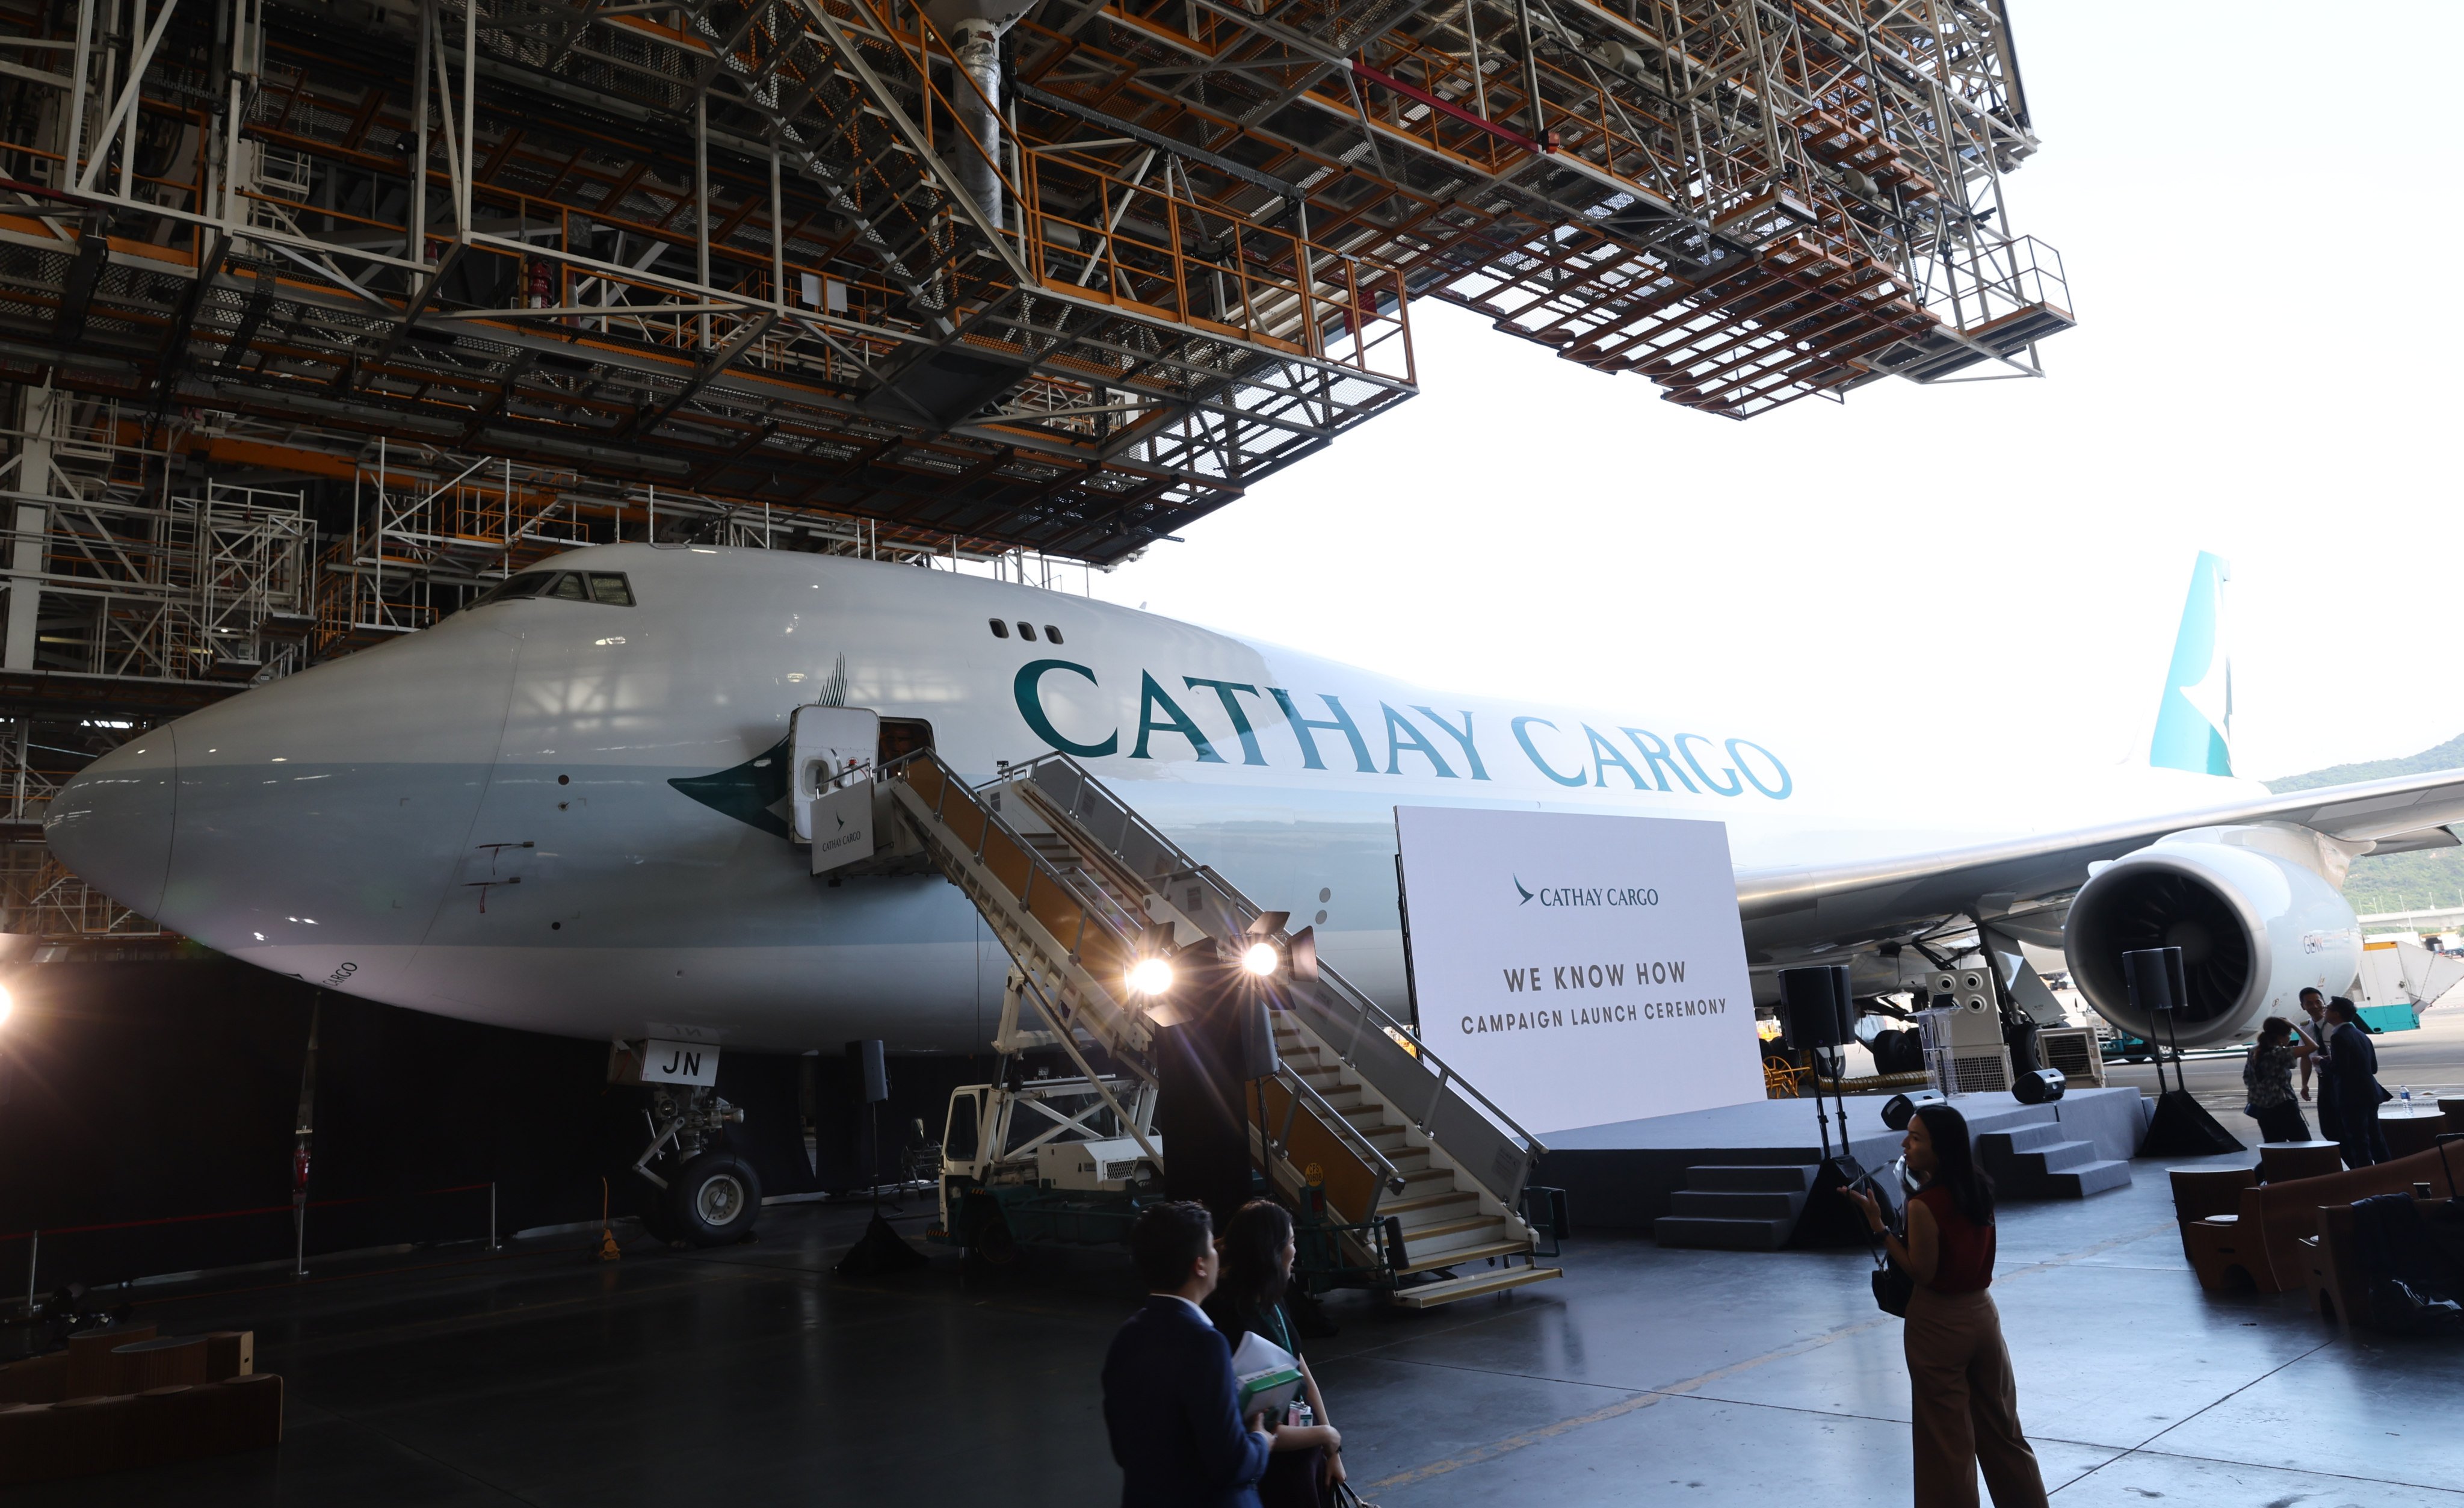 The first freight aircraft to wear the new Cathay Cargo livery is unveiled on Wednesday. Photo: Yik Yeung-man